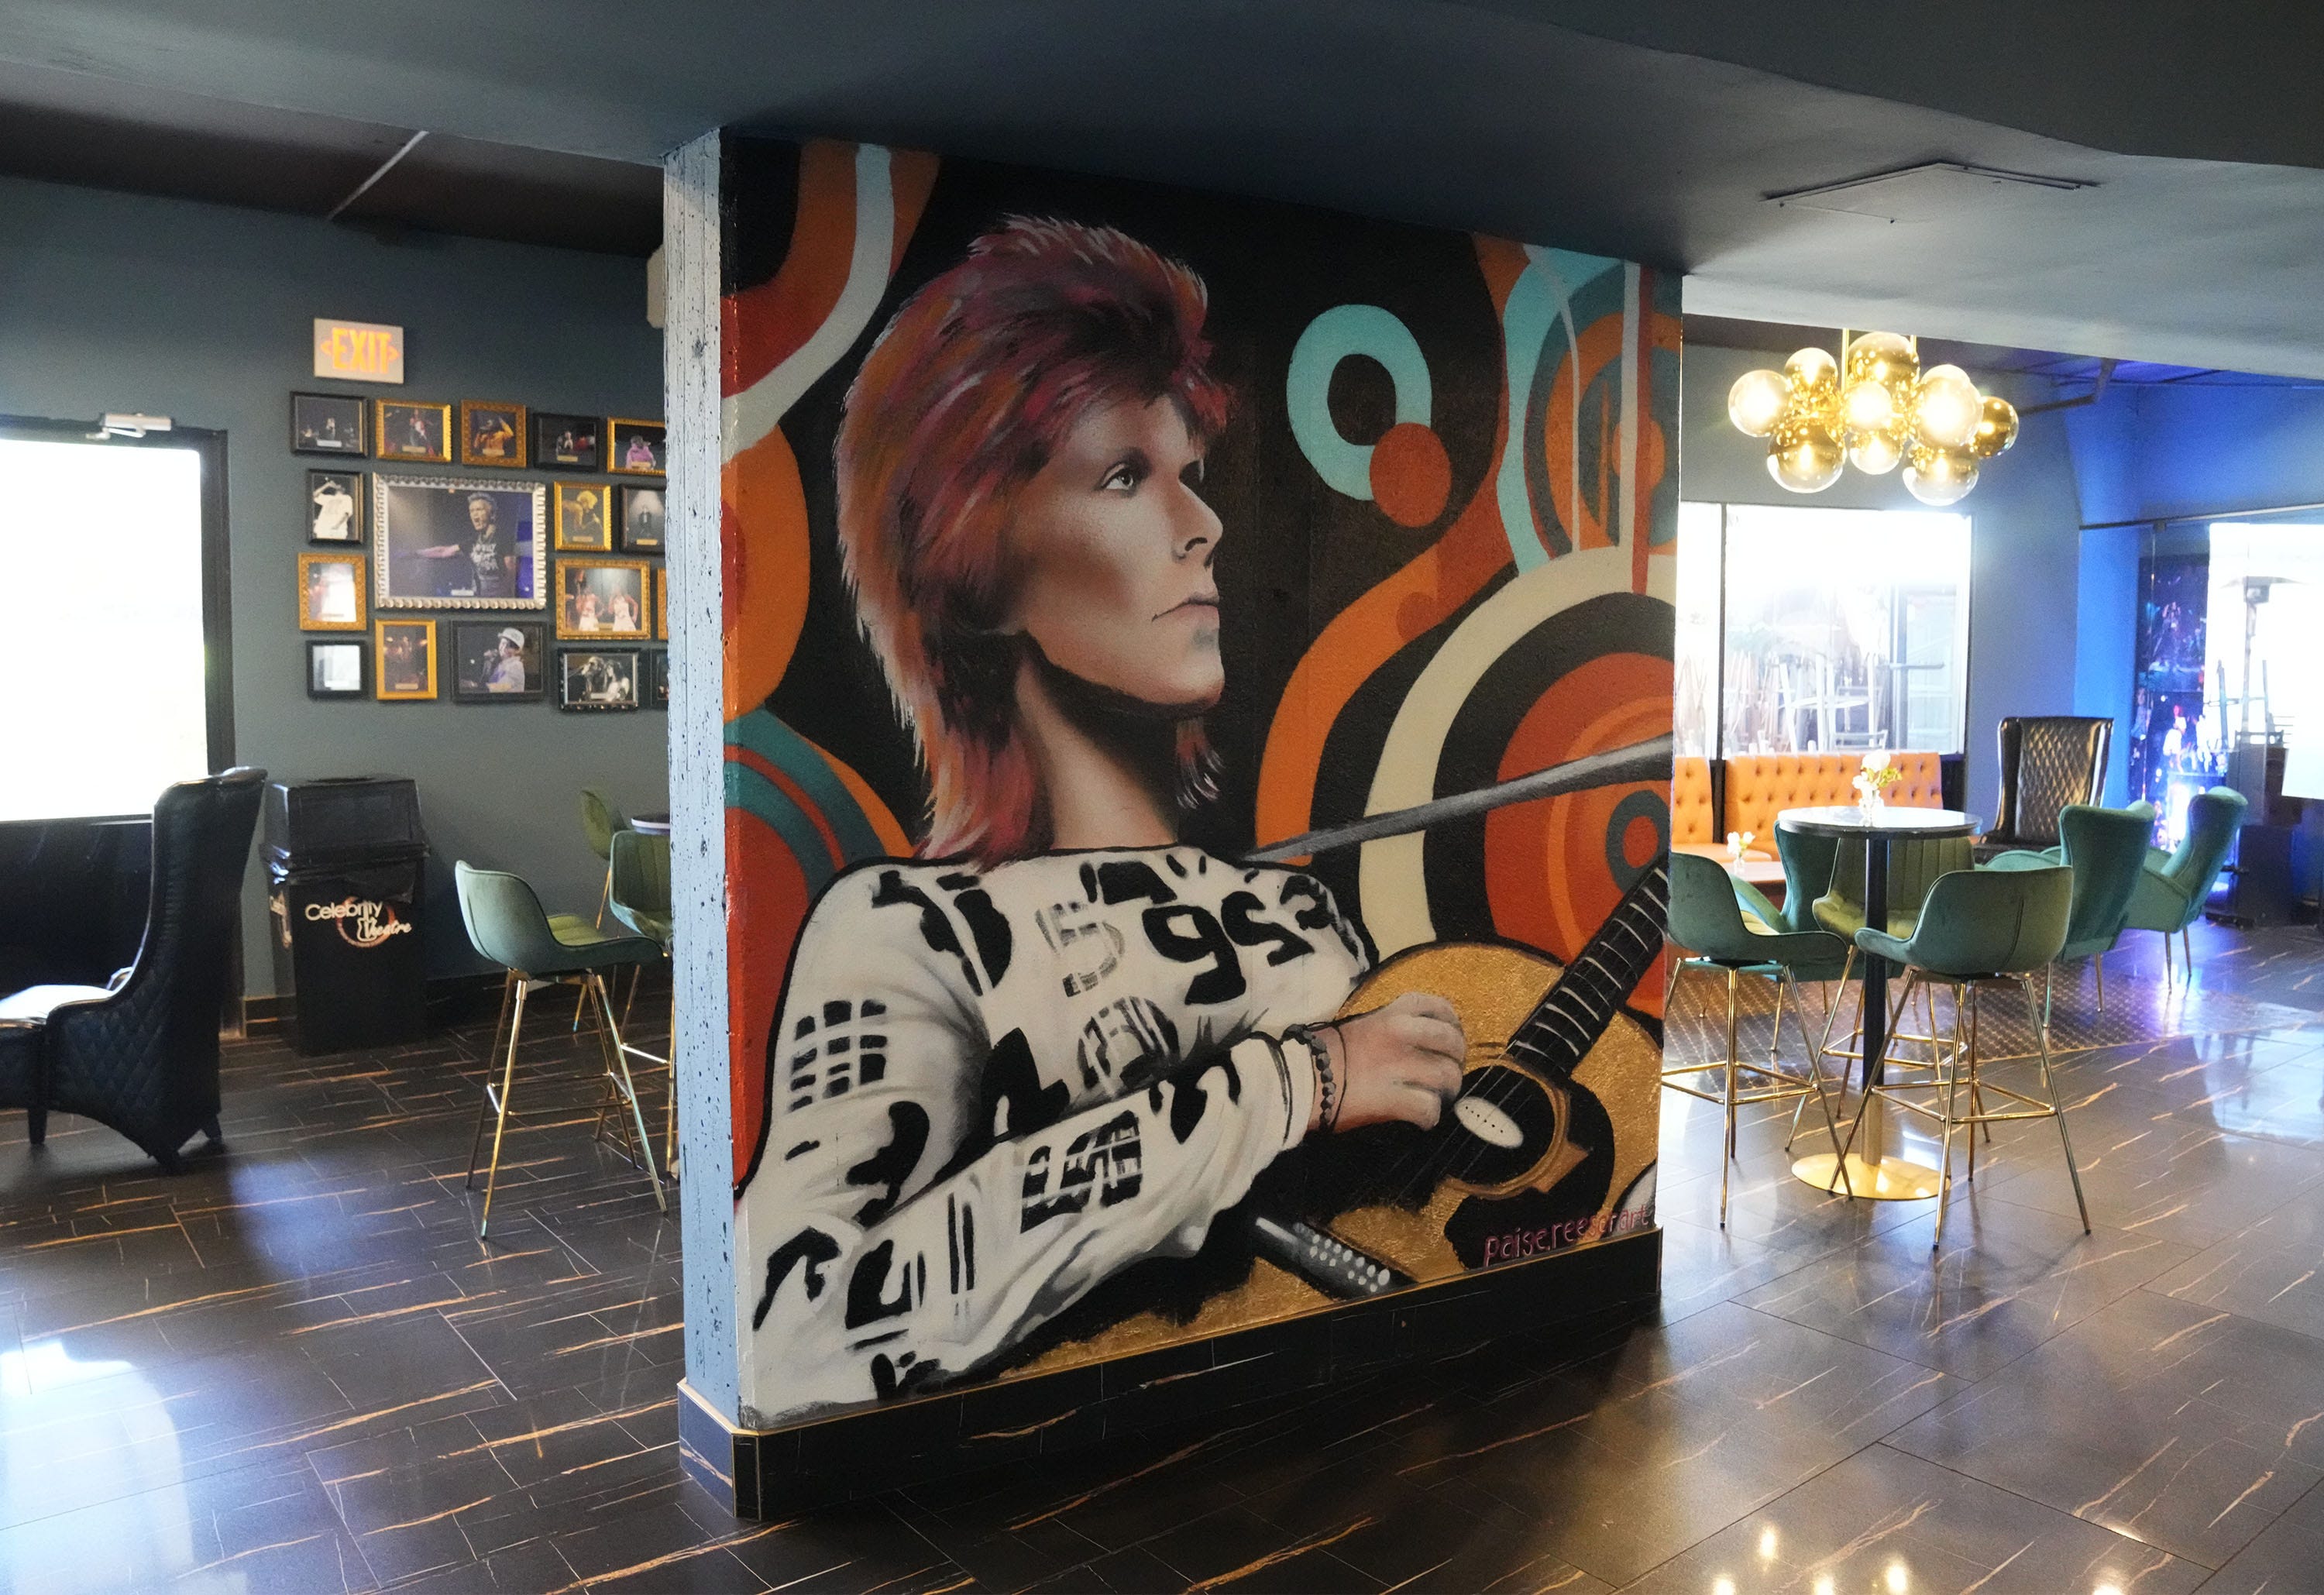 this historic phoenix music venue got a major makeover at 60. see what changed